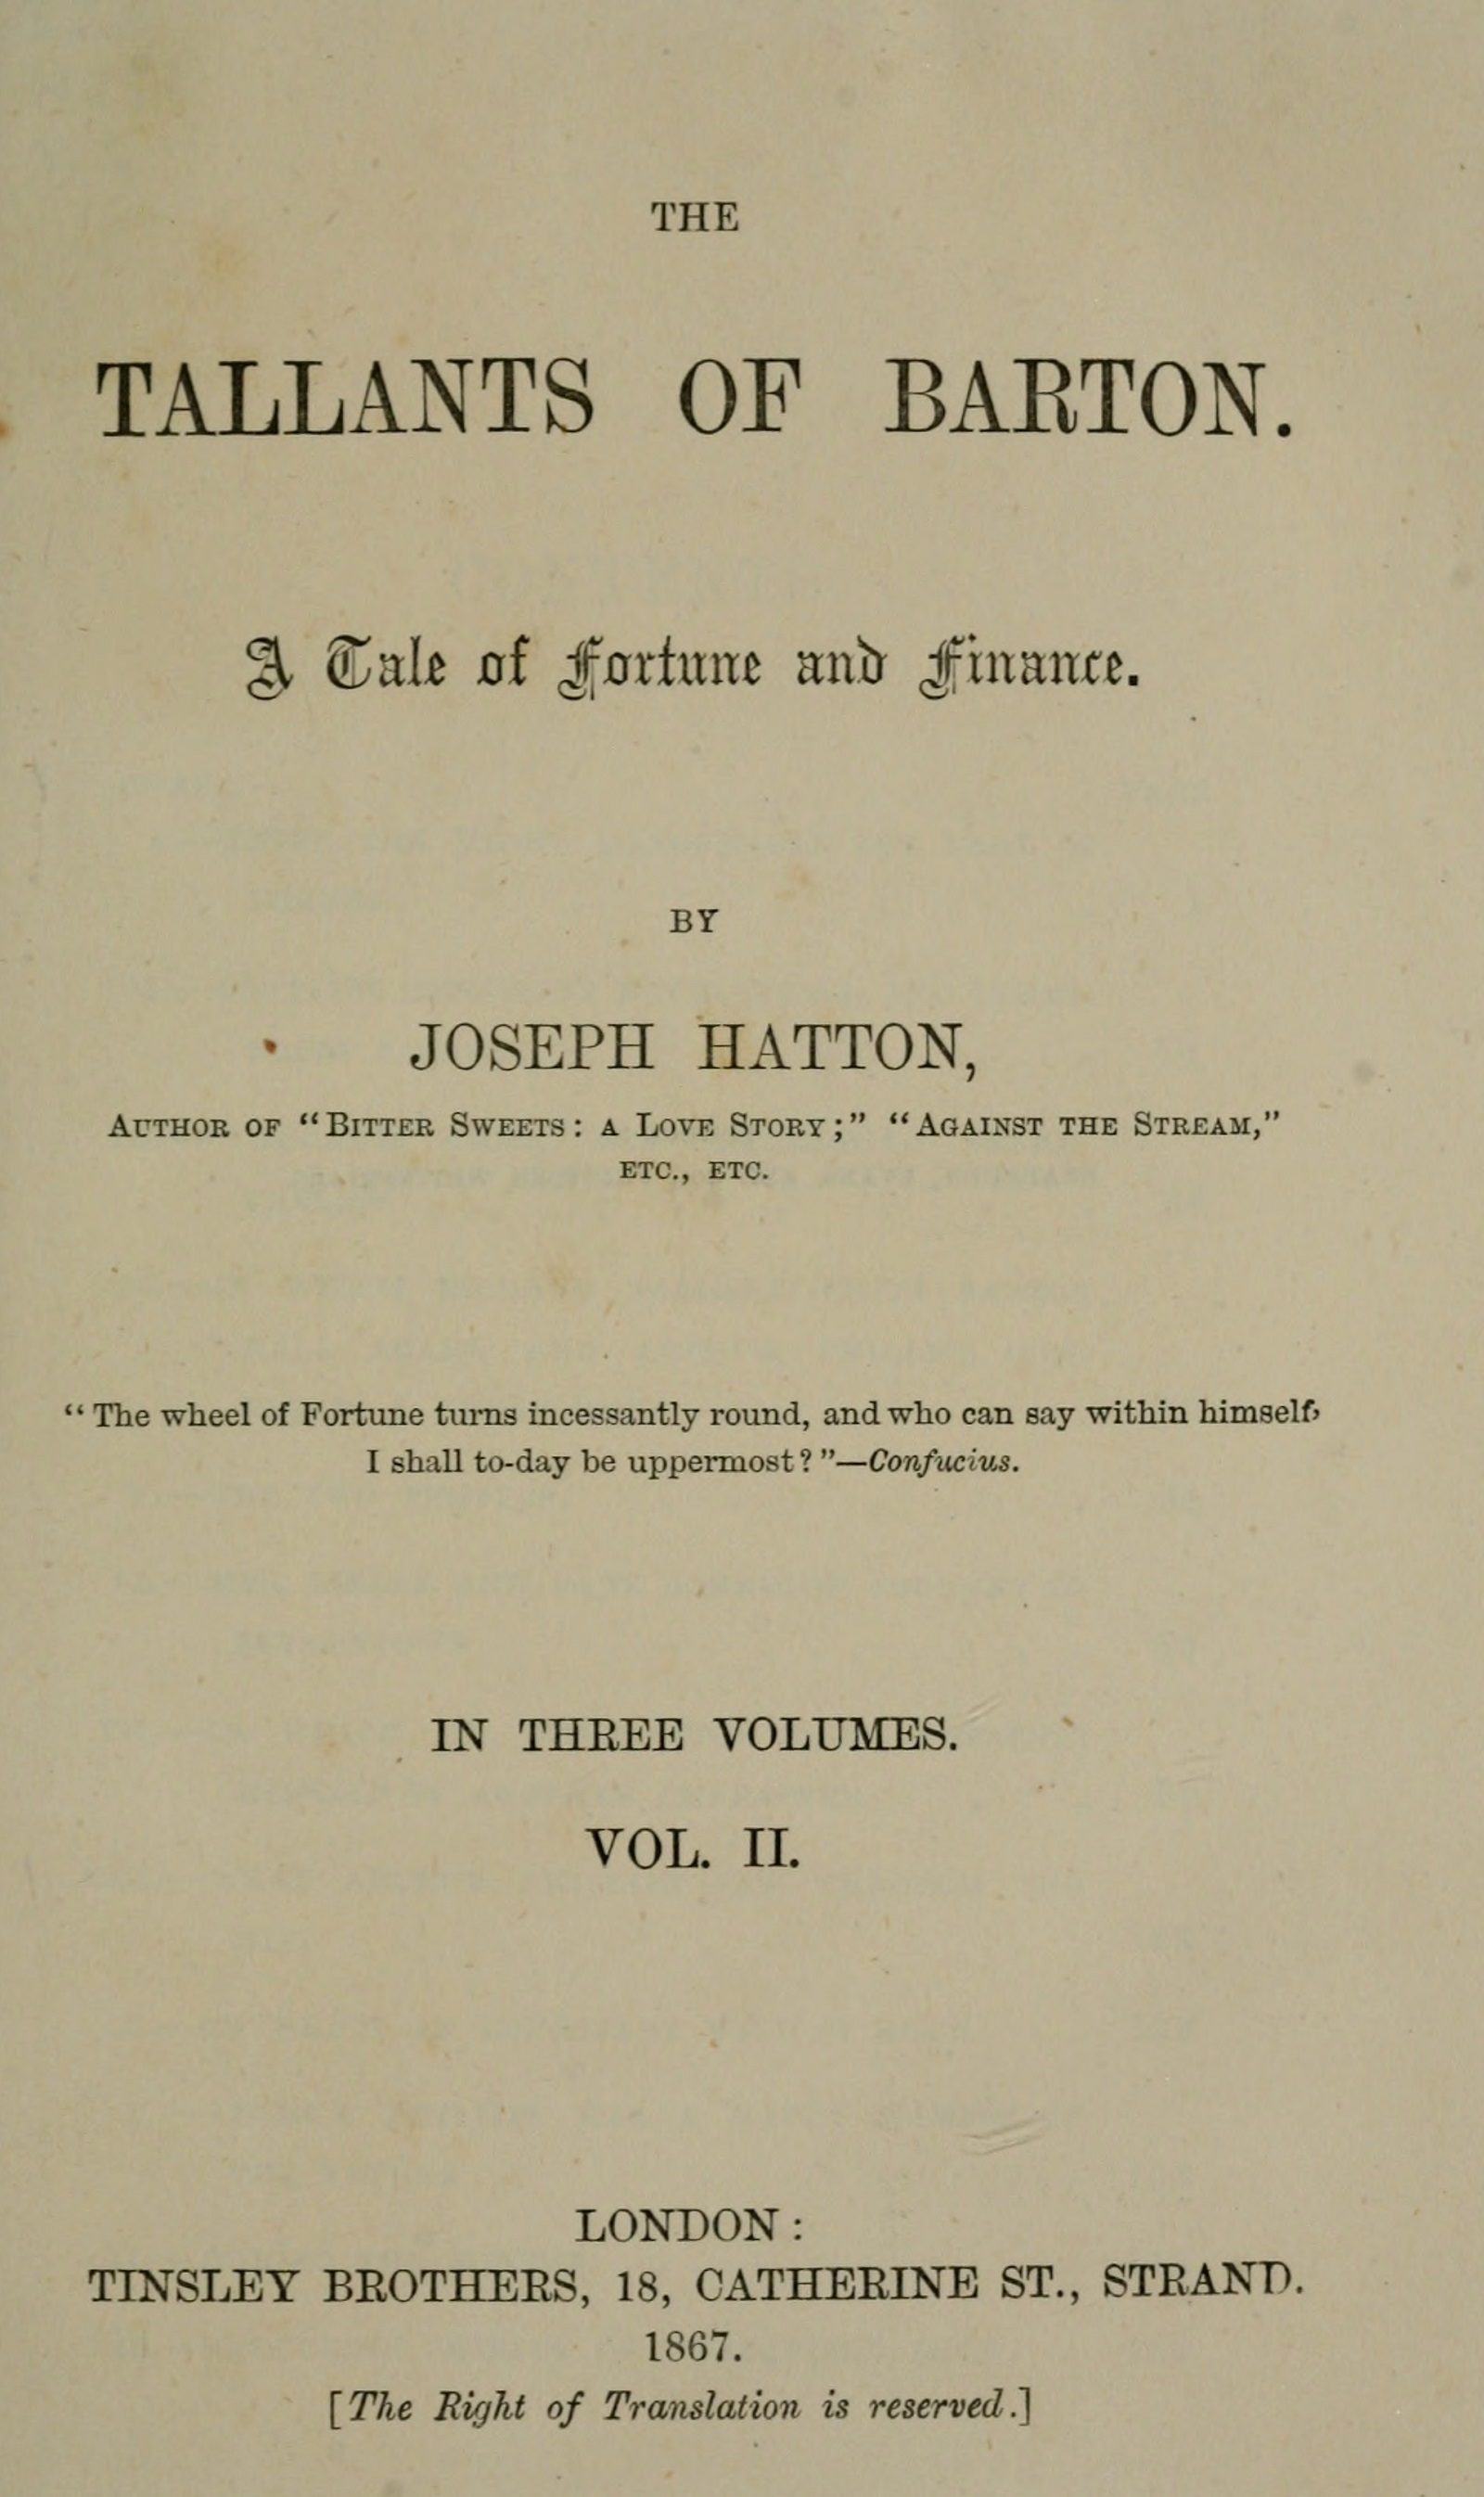 The Tallants of Barton, vol. 2 (of 3) : A tale of fortune and finance